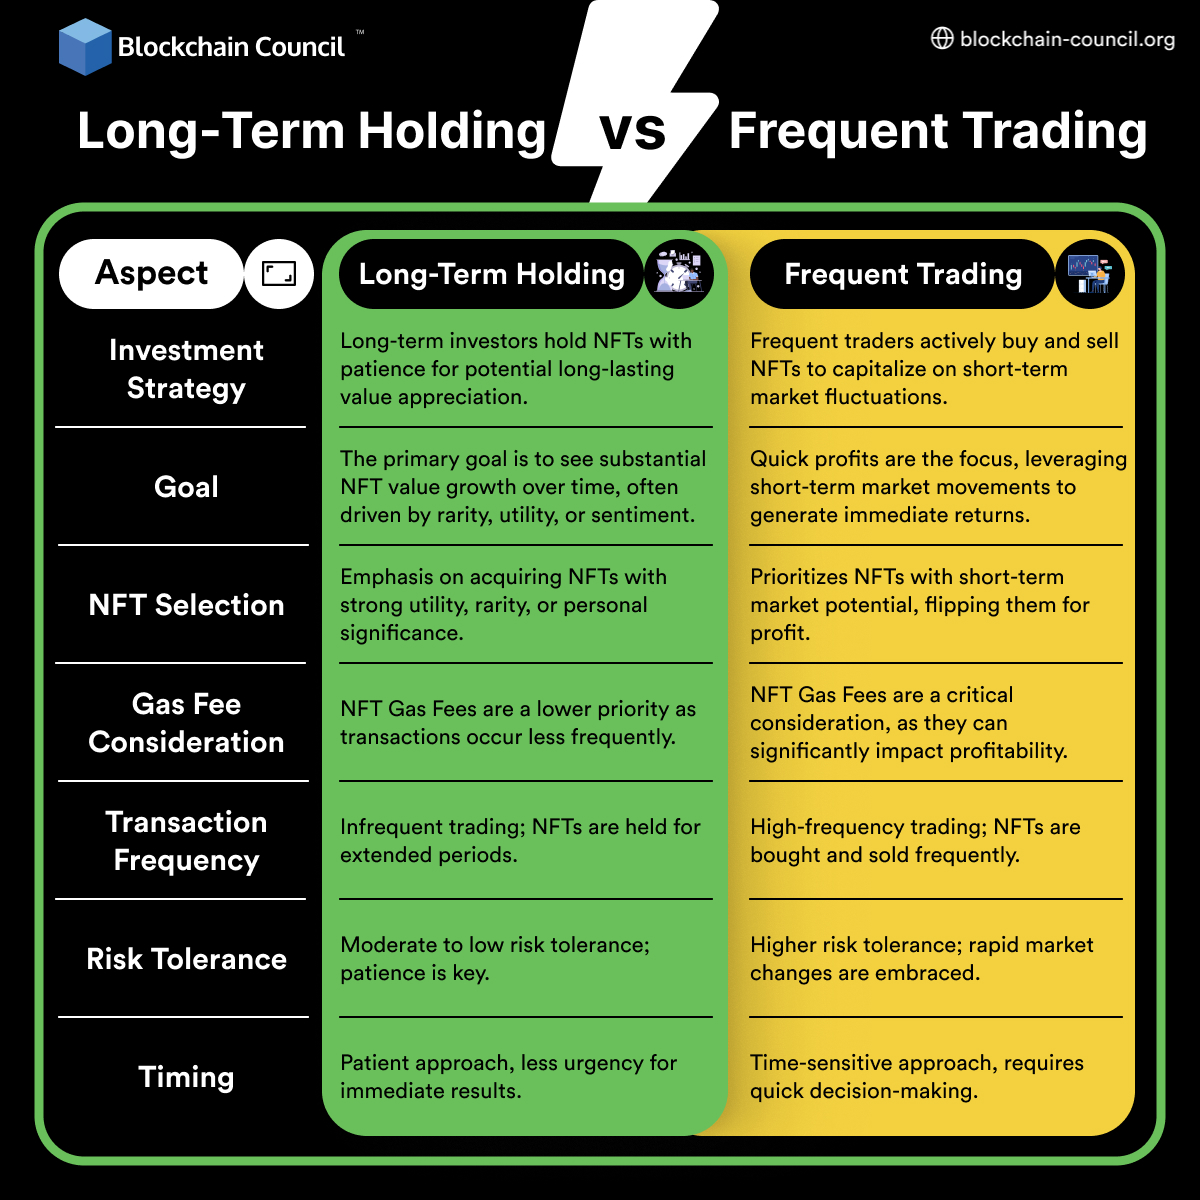 Long-Term Holding vs. Frequent Trading